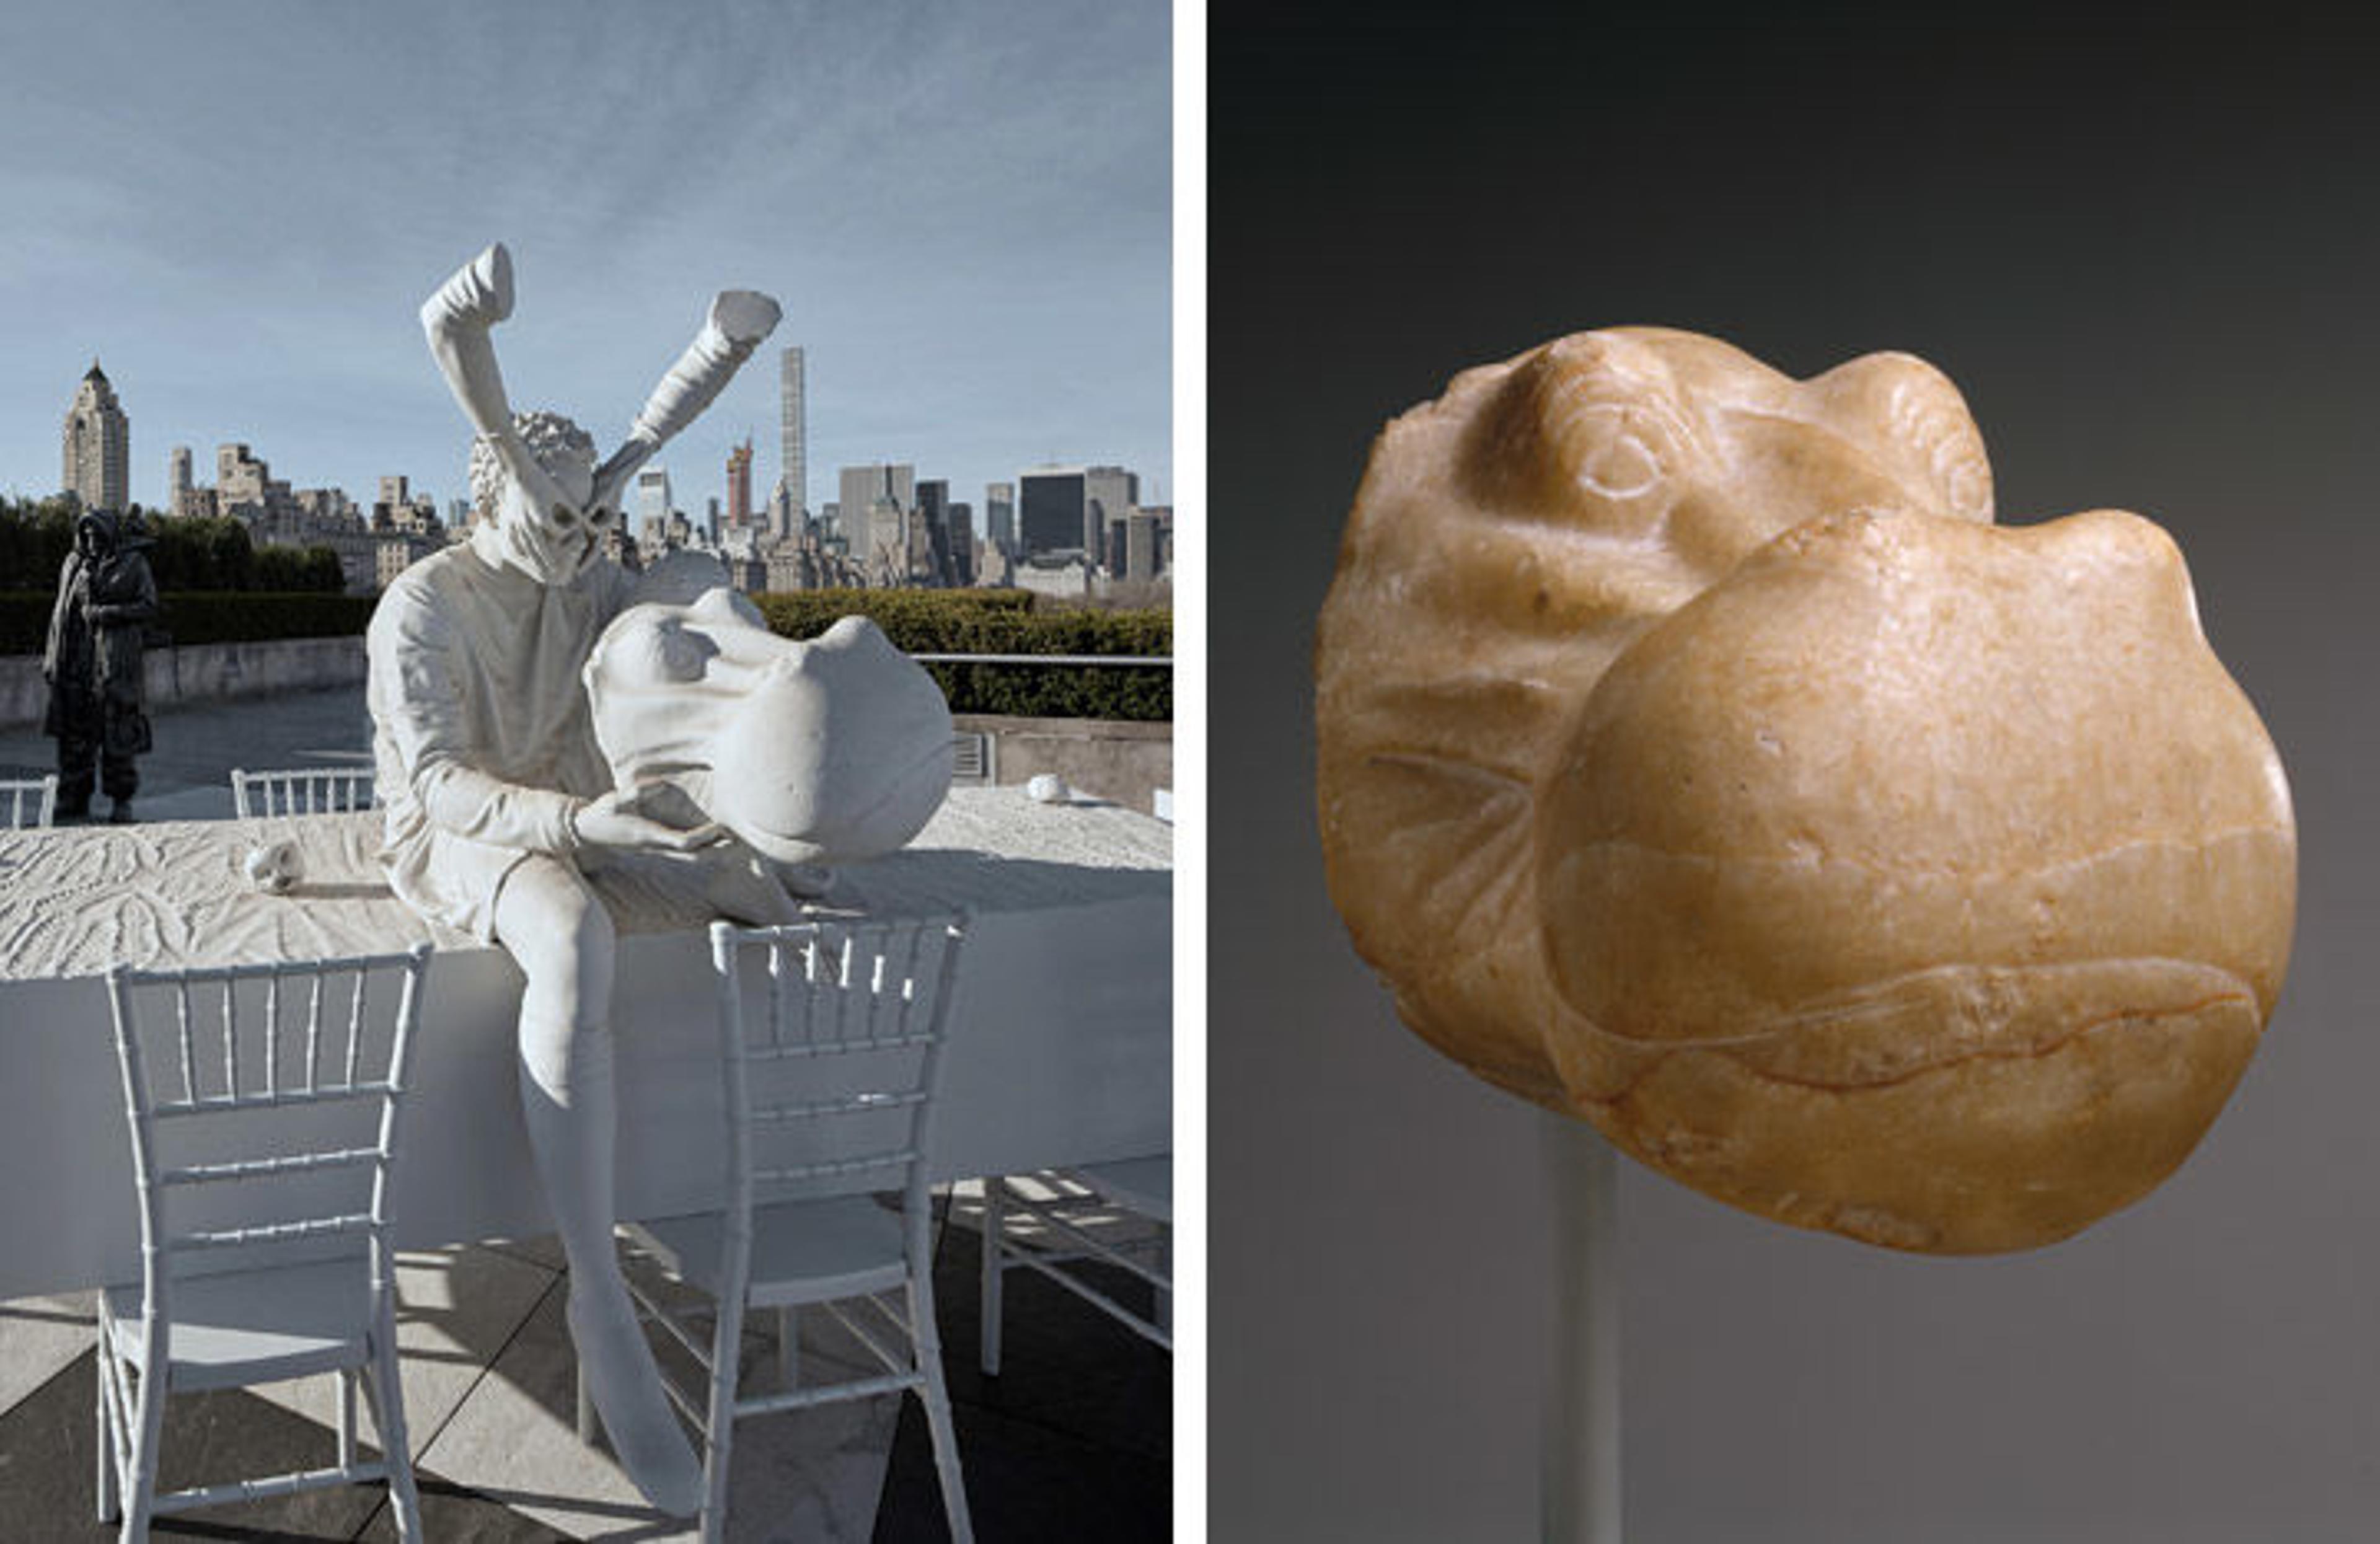 Left: View of Adrian Villar Rojas's Theater of Disappearance on The Met's Cantor Roof Garden. Right: sculpture of a head of a hippopotamus from Ancient Egypt